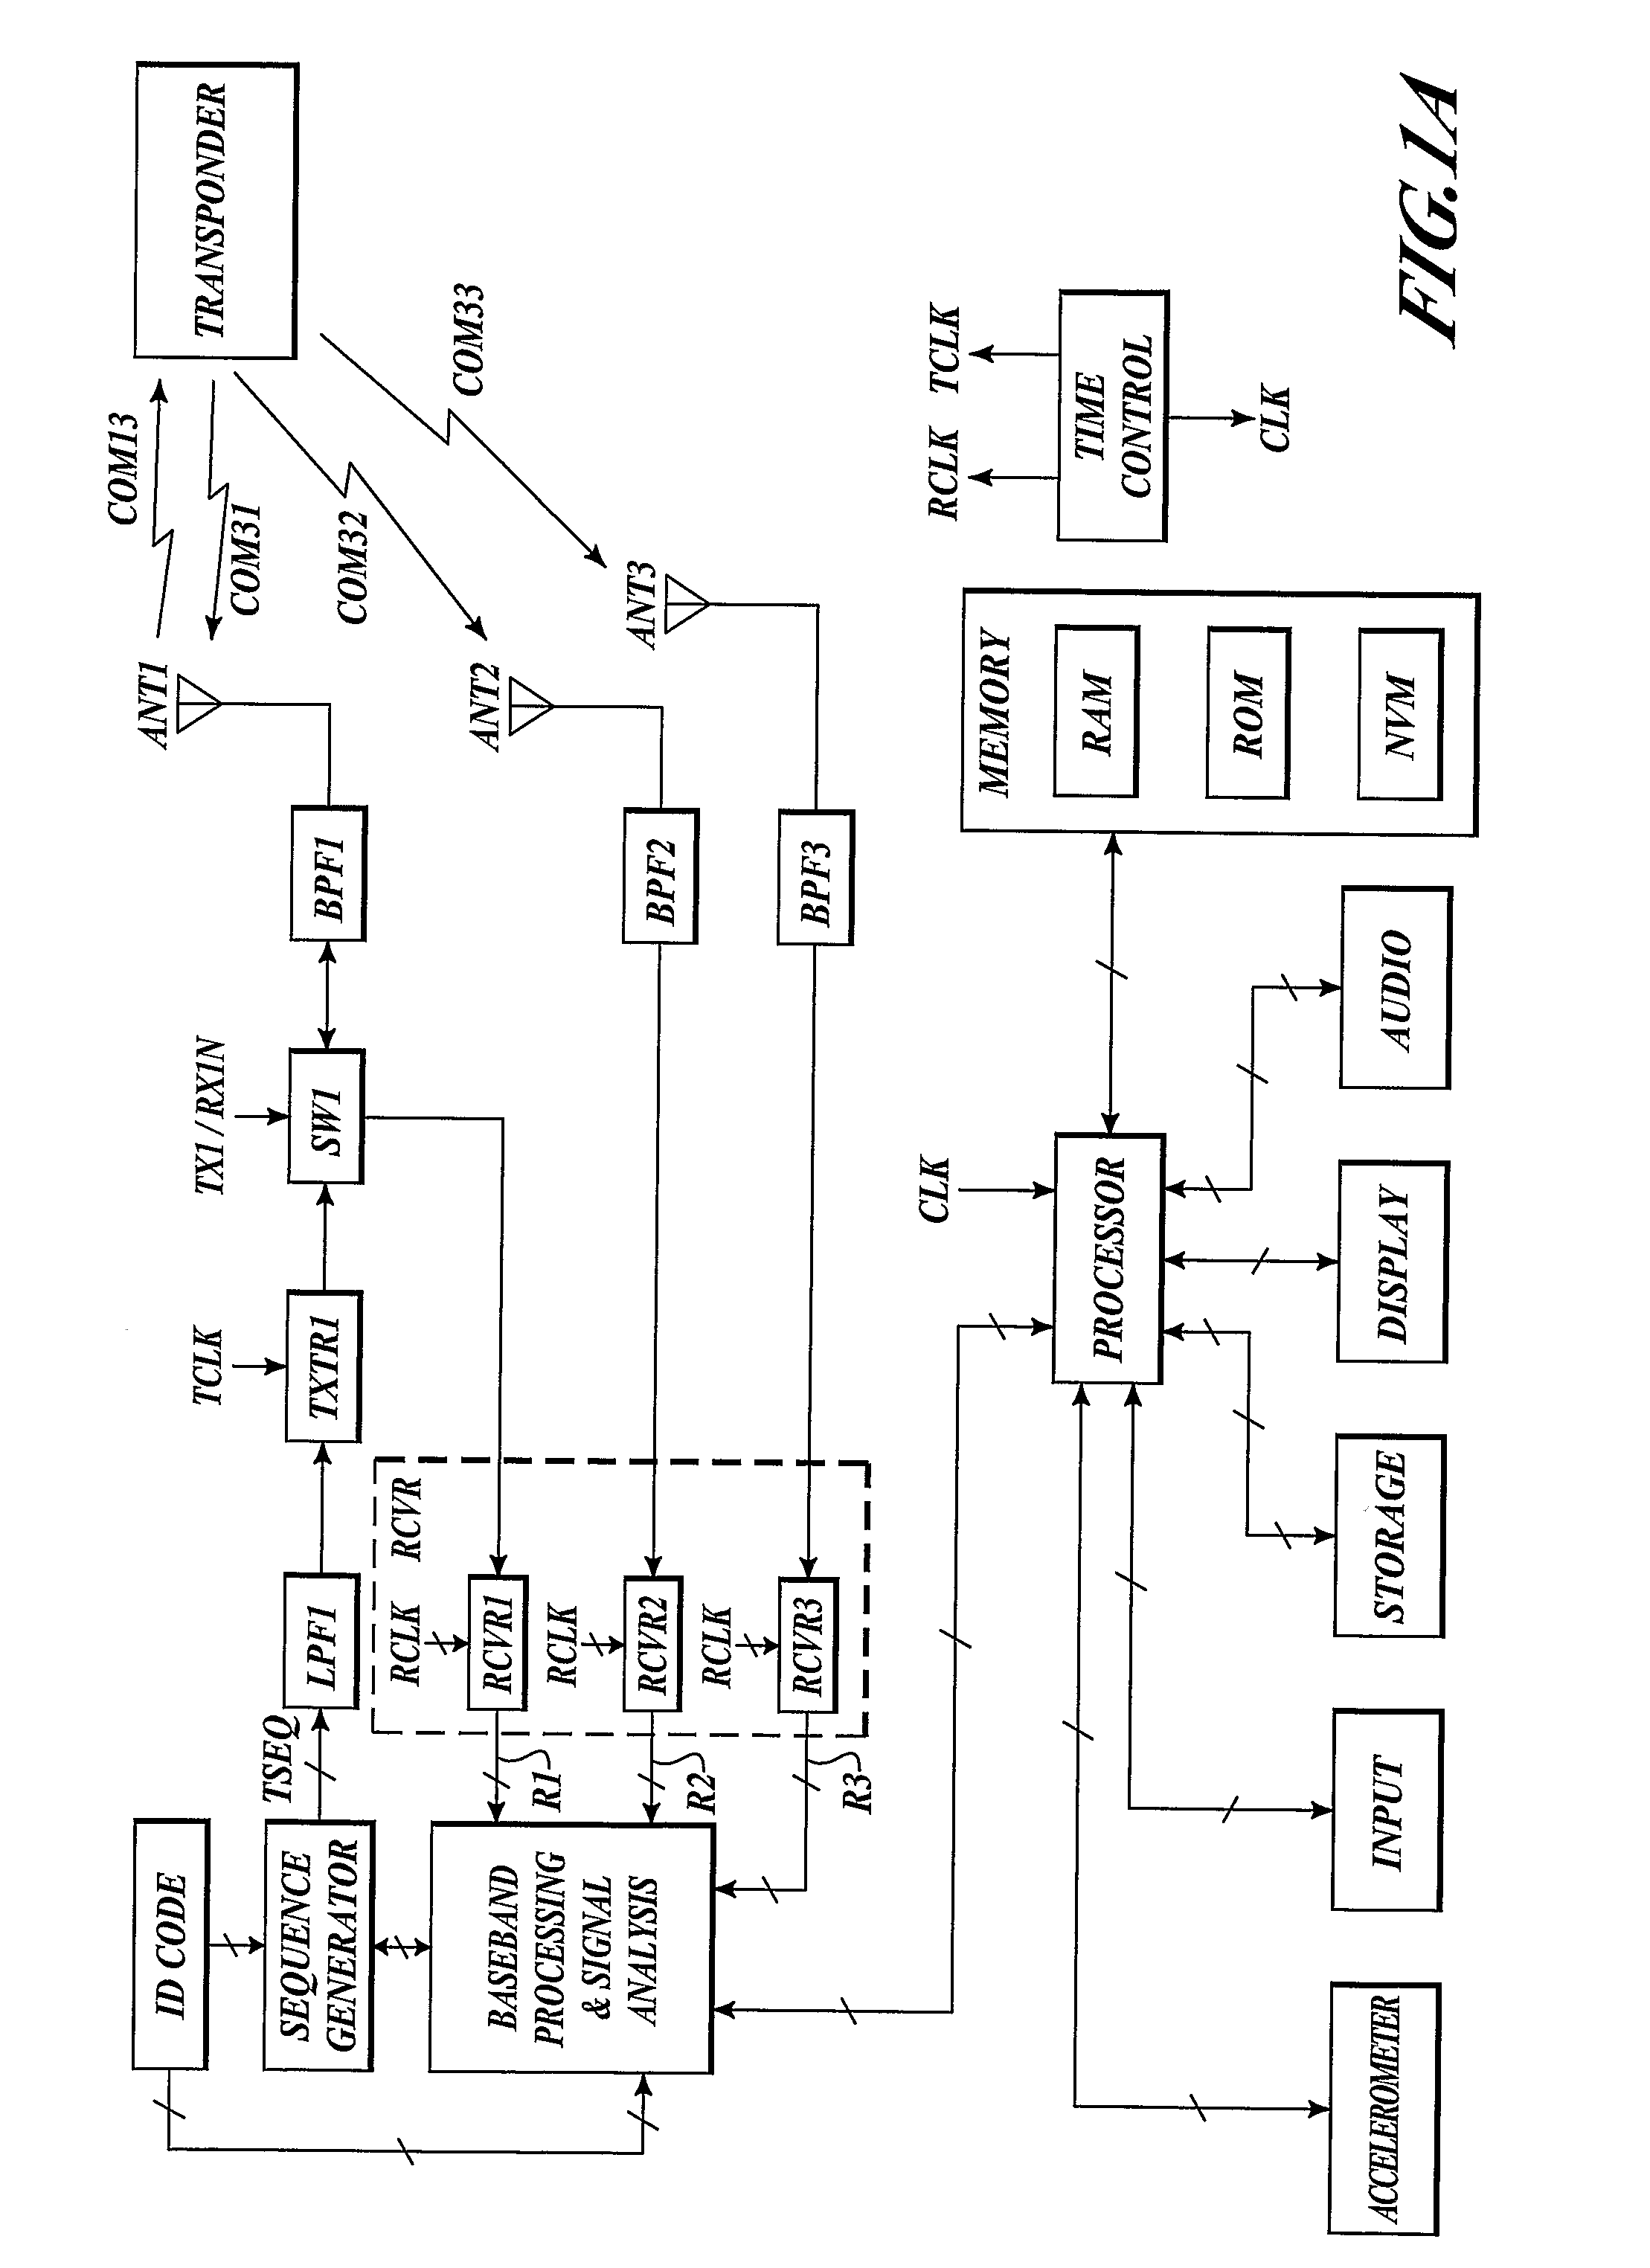 System and method for locating objects and communicating with the same